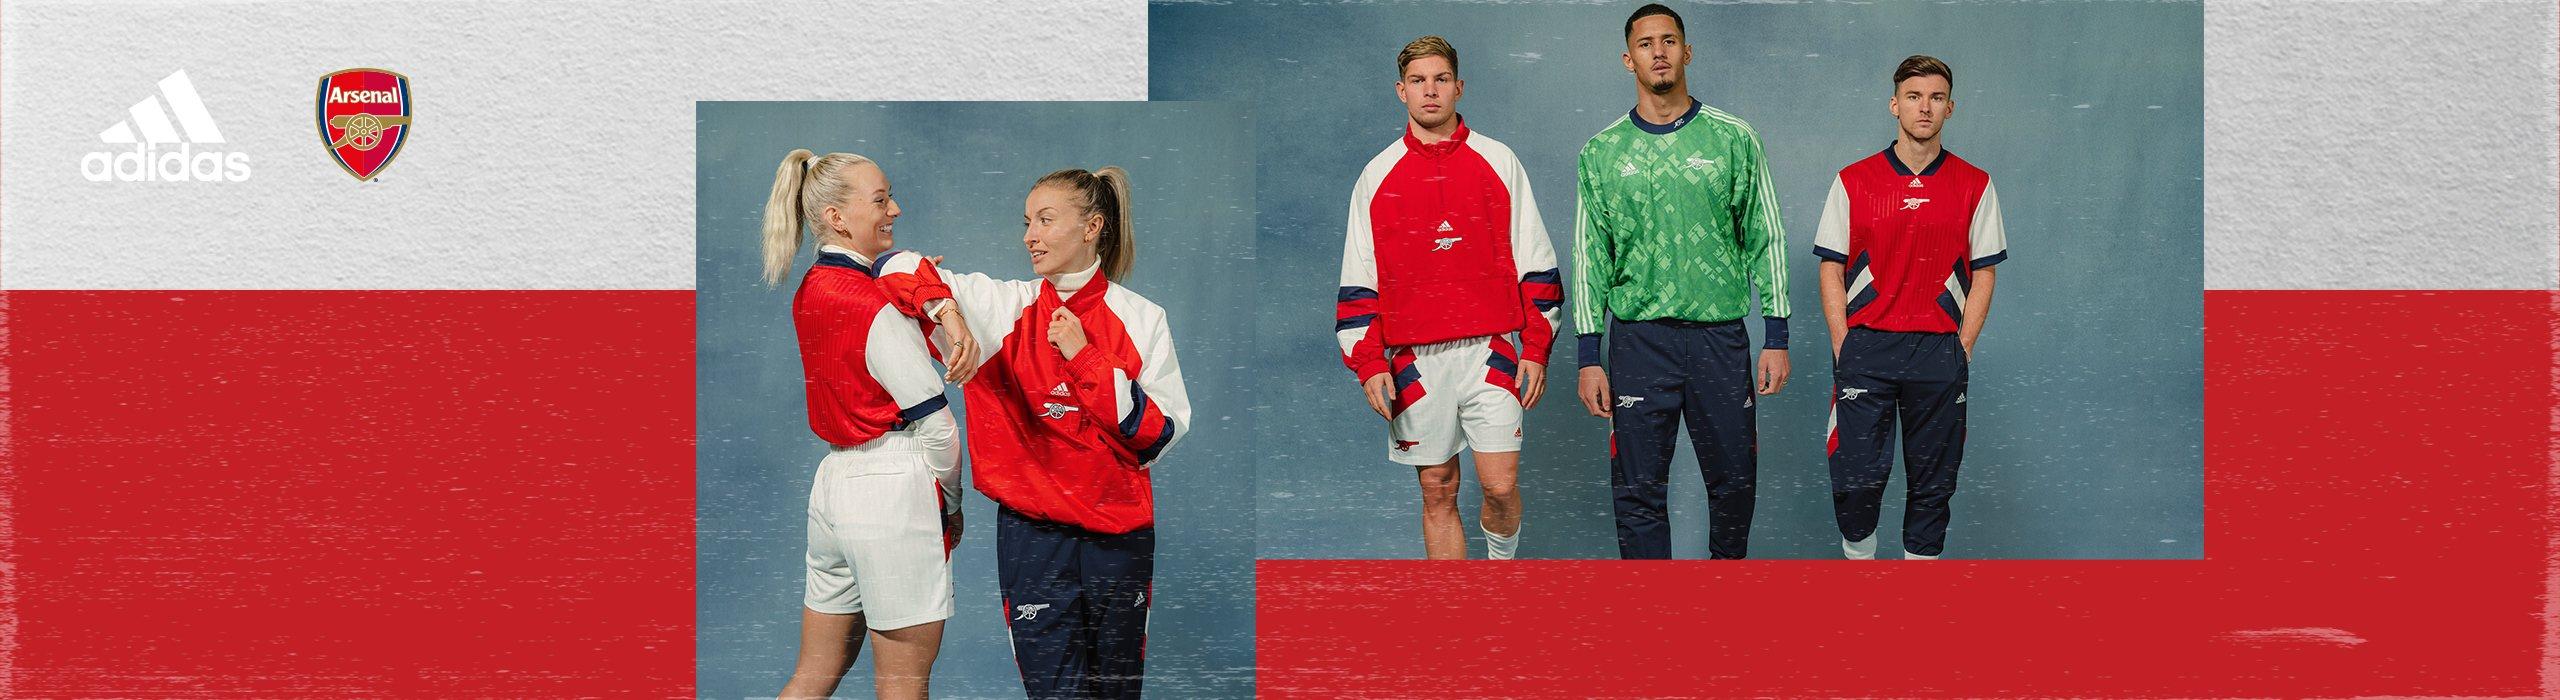 Arsenal x adidas Limited | Official Online Store